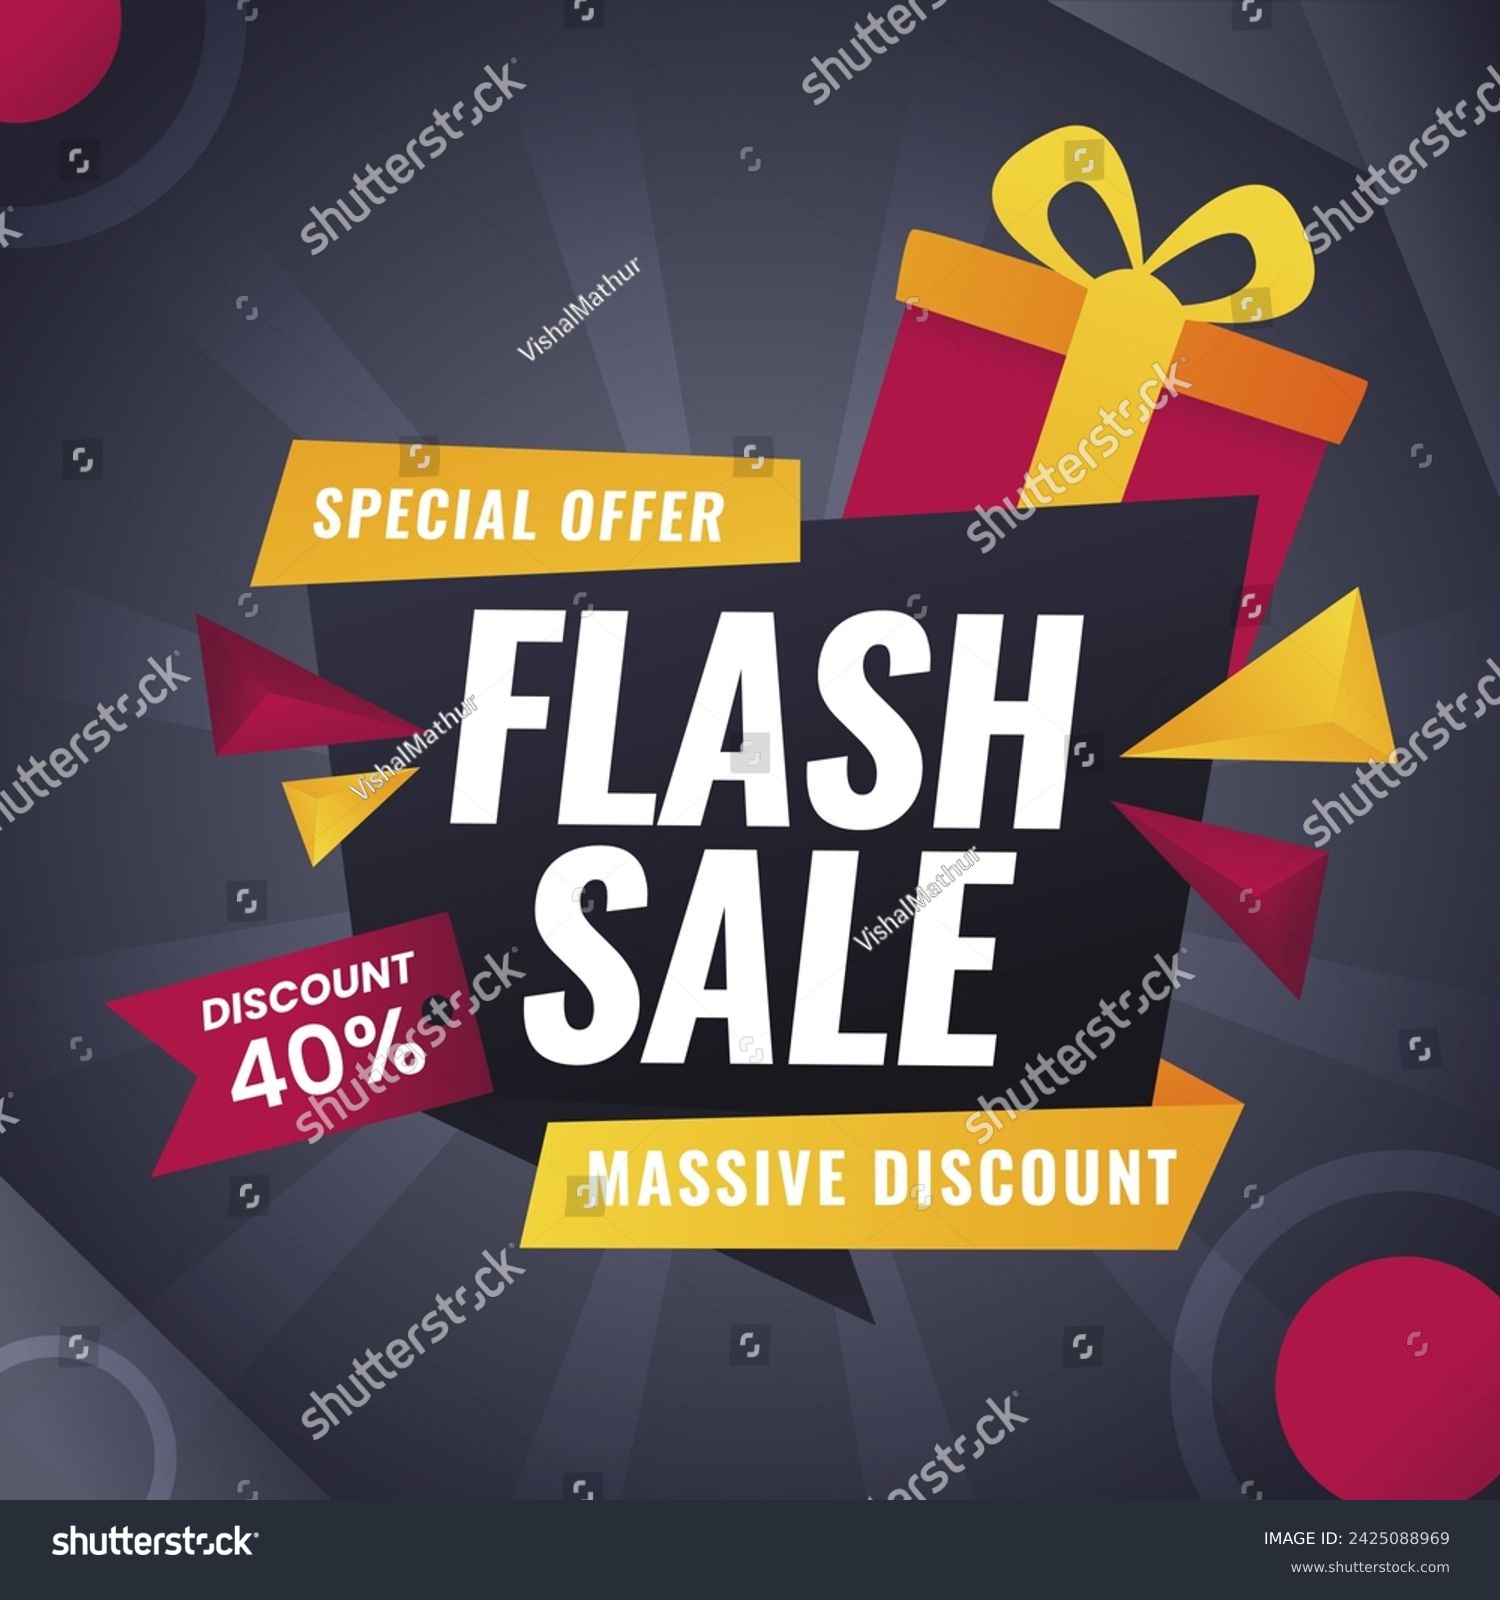 SVG of Flash Sale Vector with gift box design background with discount up to 40%. Special Offer. Vector illustration. Massive Discount. svg